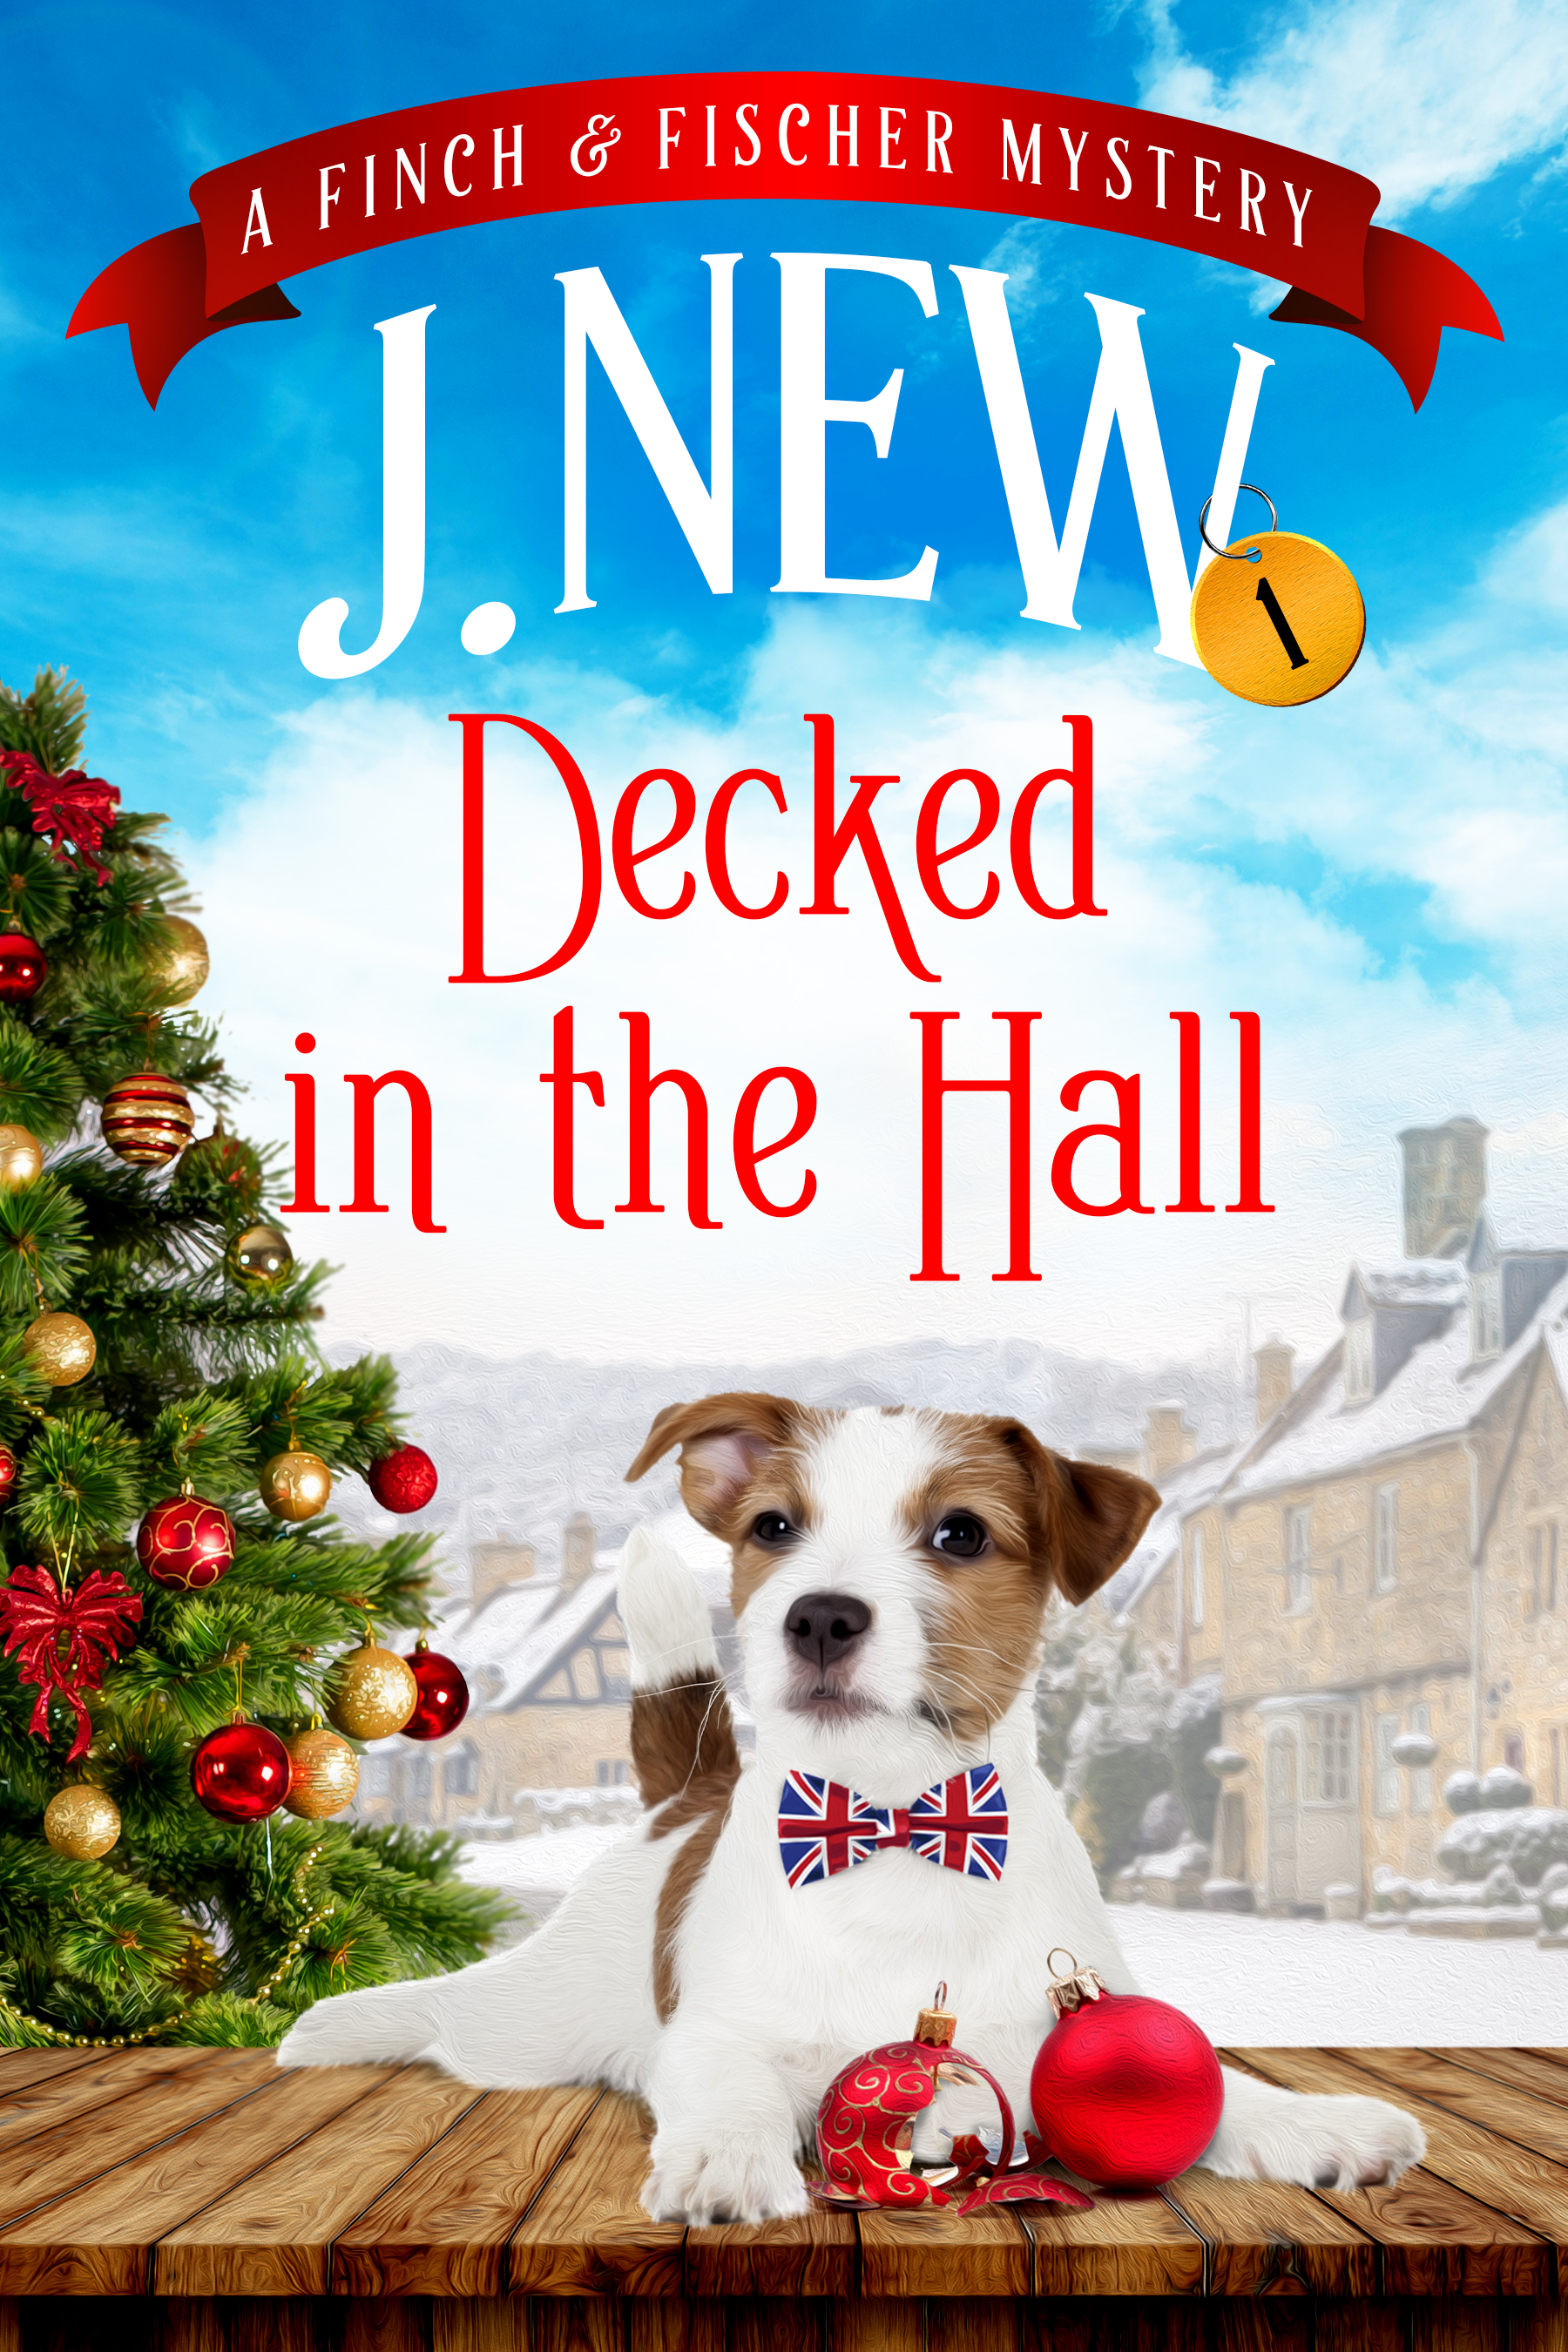 Decked in the Hall is the first popular British cozy mystery in the Finch and Fischer mystery series by British author J. New